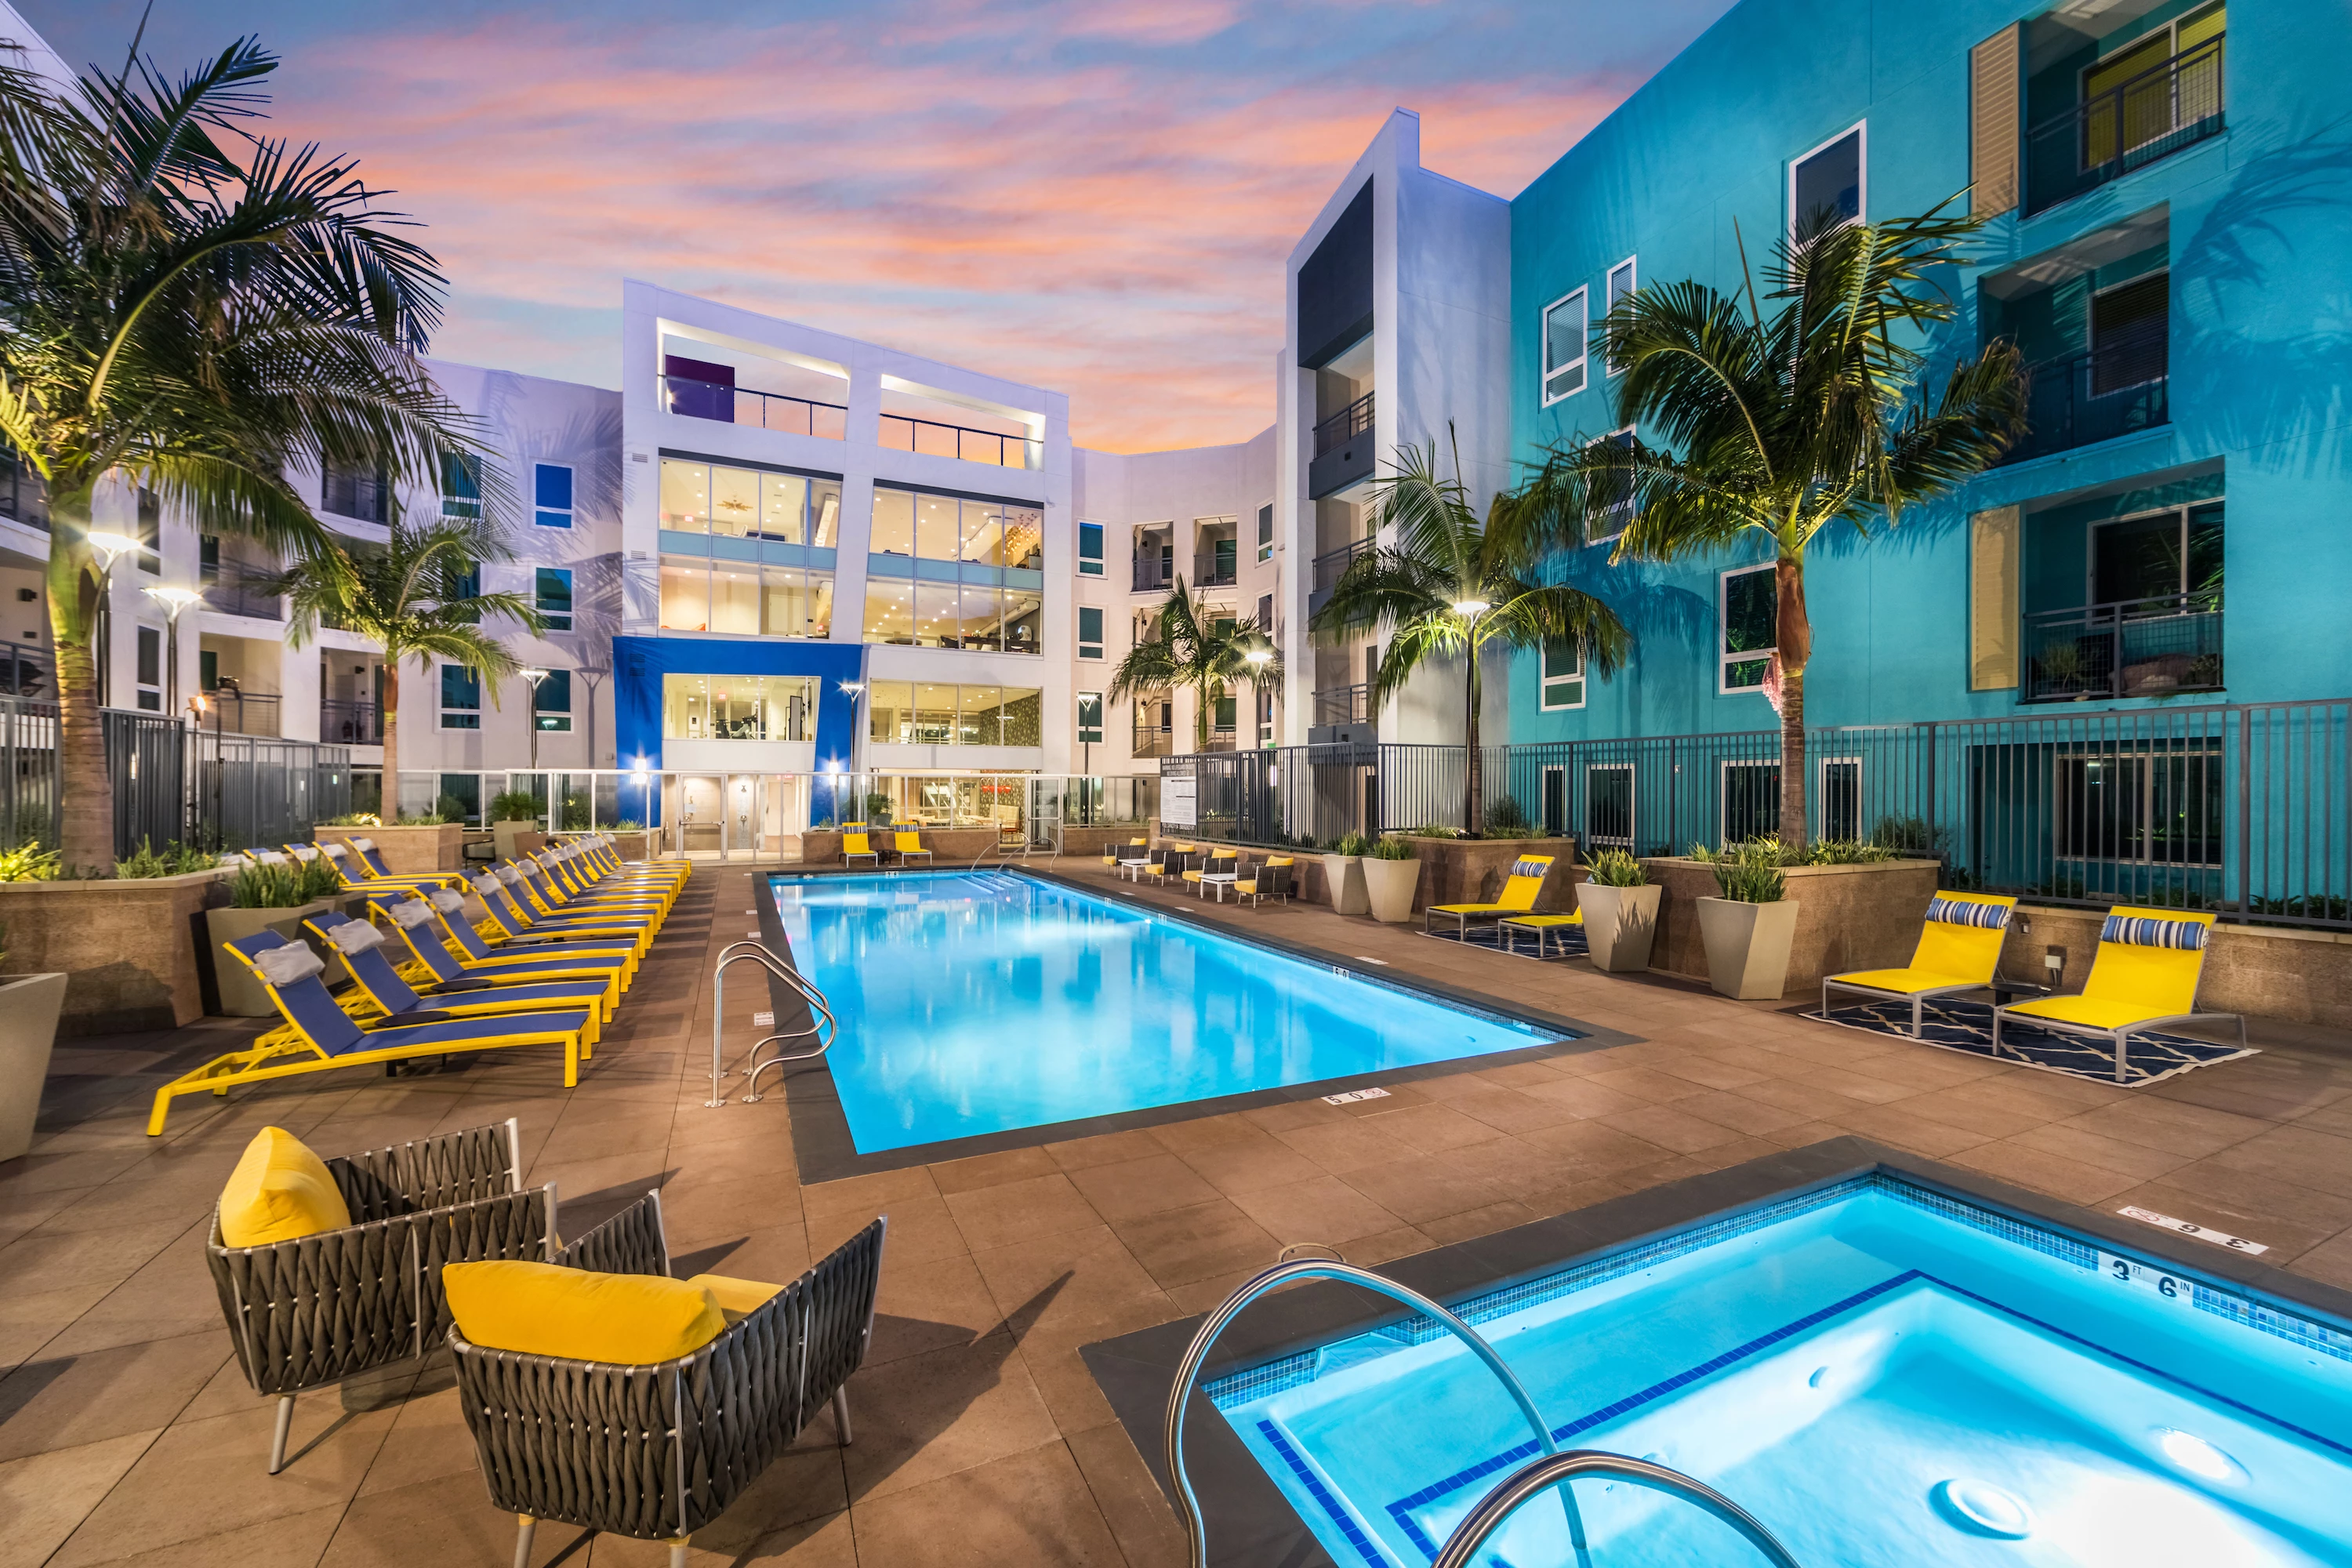 1251-15-pool-at-dusk-at-vela-on-ox-apartments-in-woodland-hills-ca.jpg